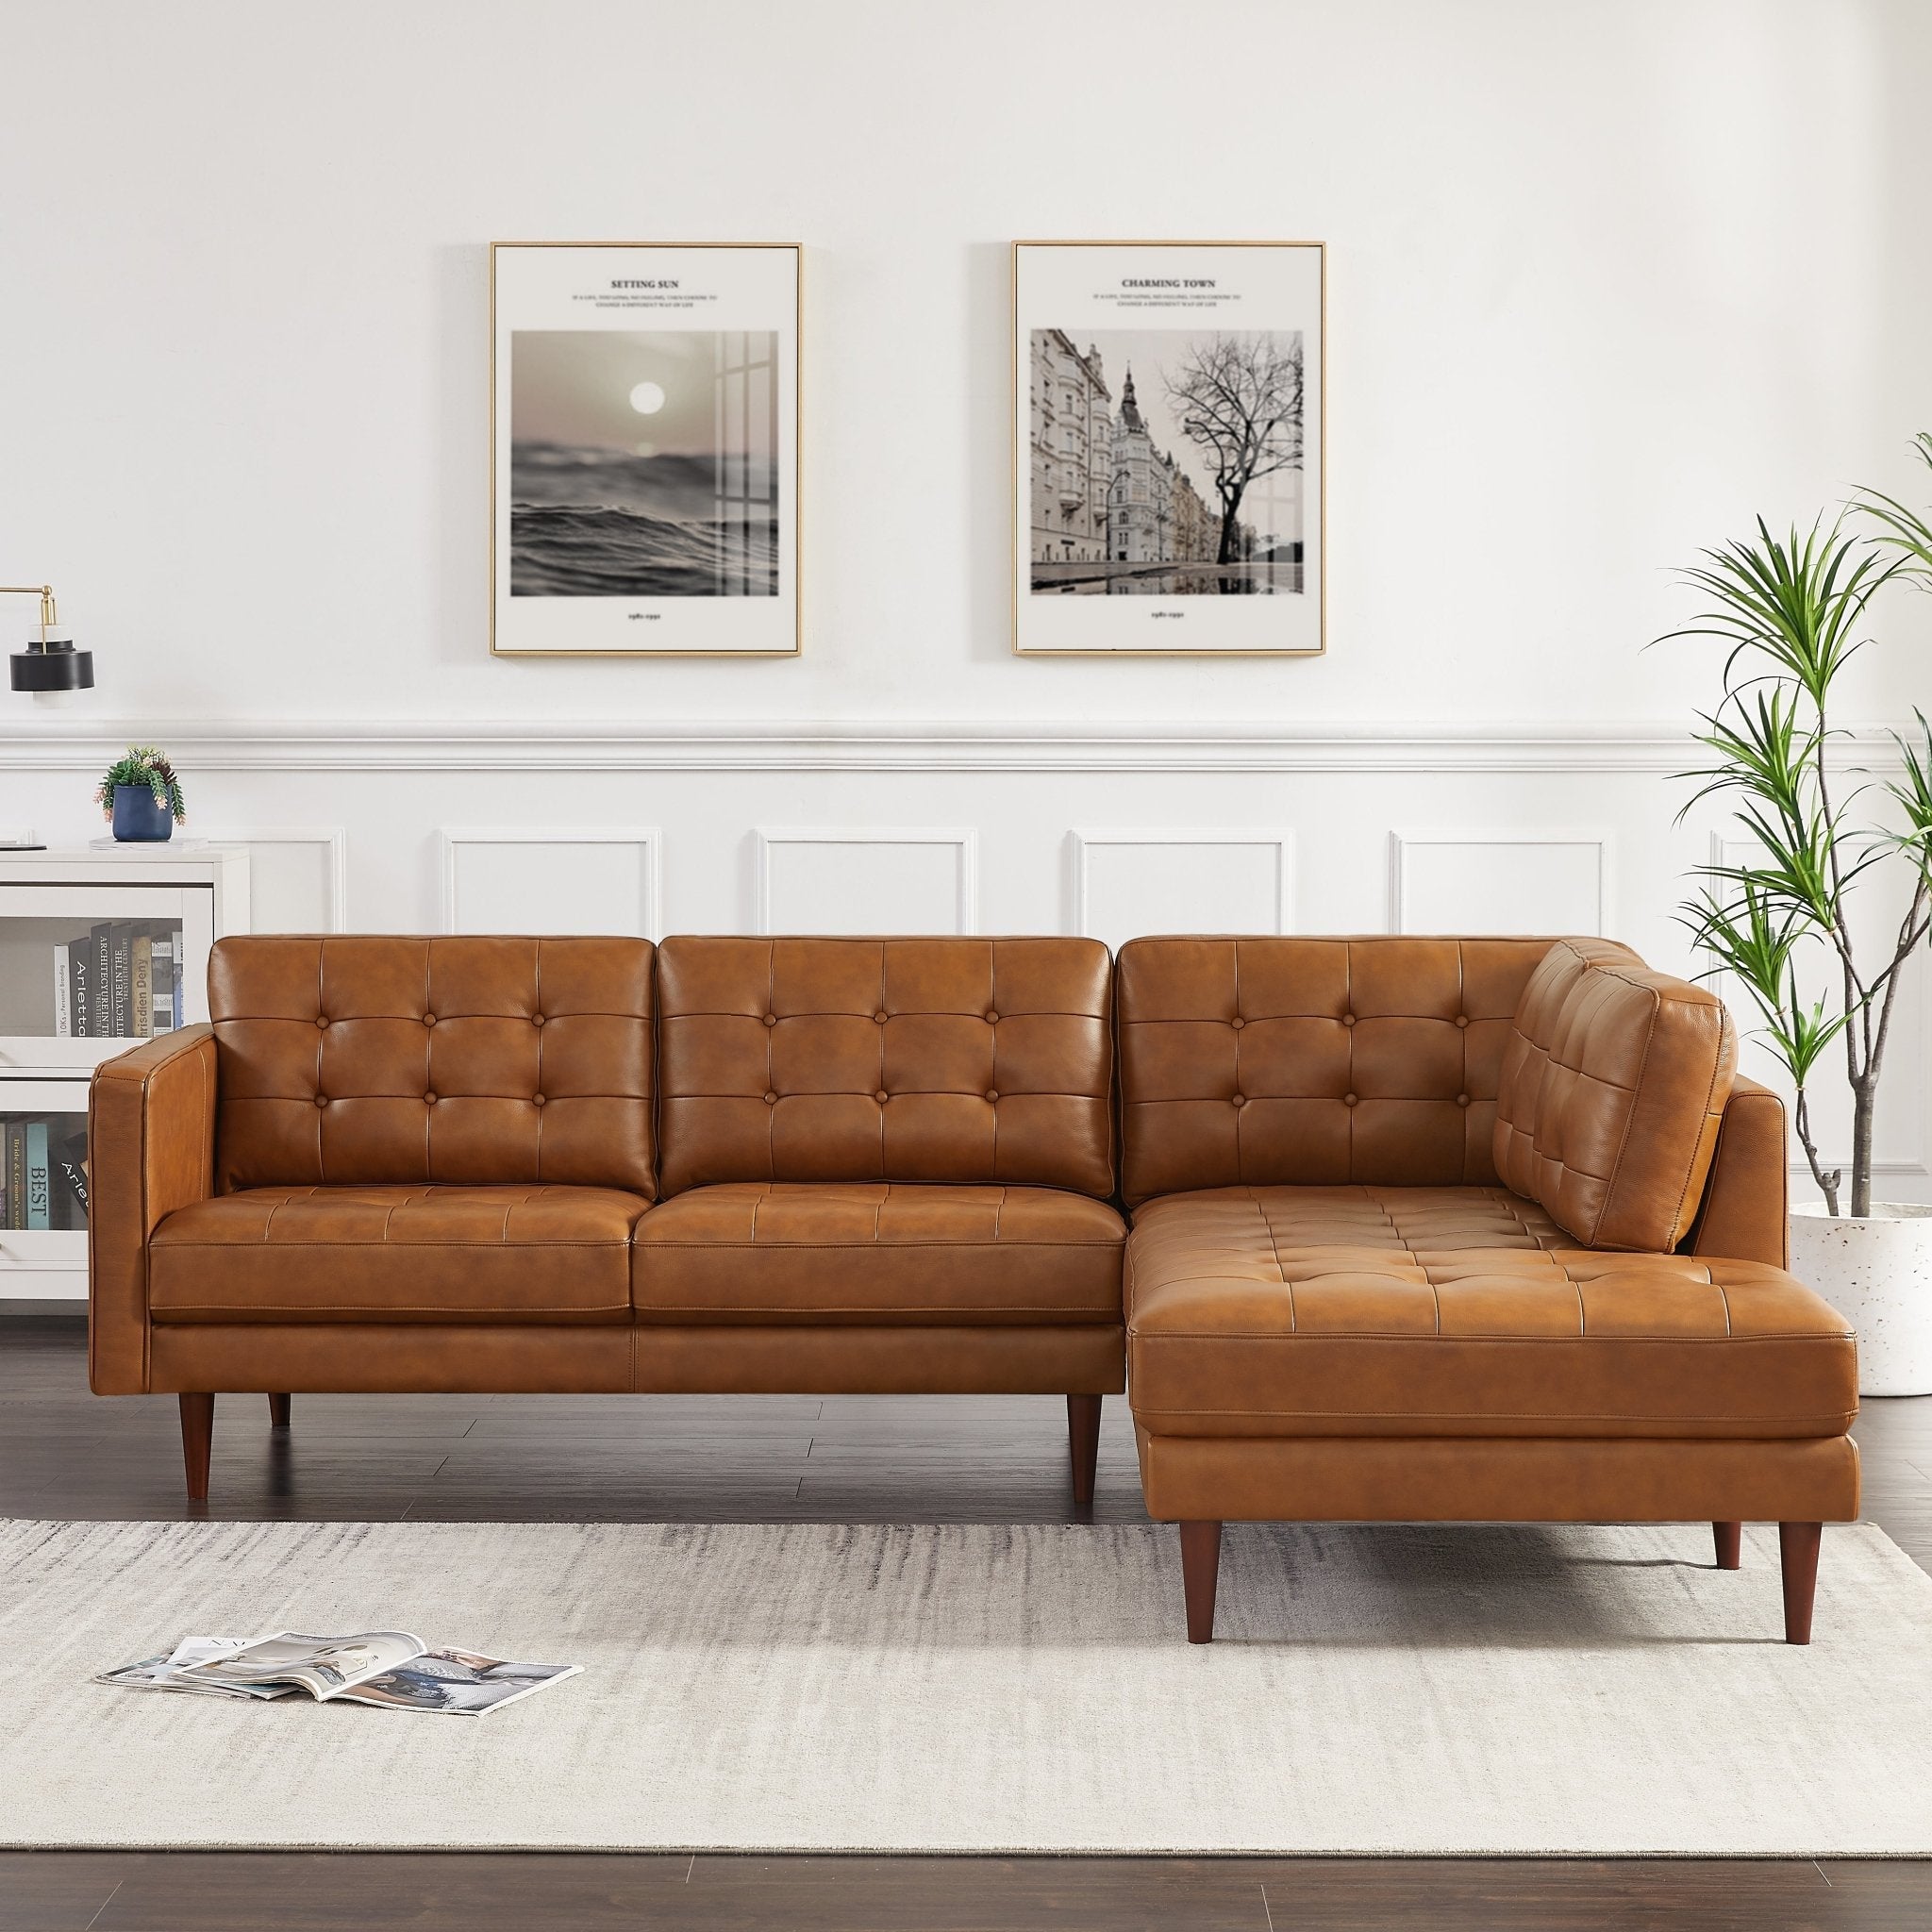 Lugano L-Shaped Genuine Leather Right-Facing Sectional Sofa Cognac